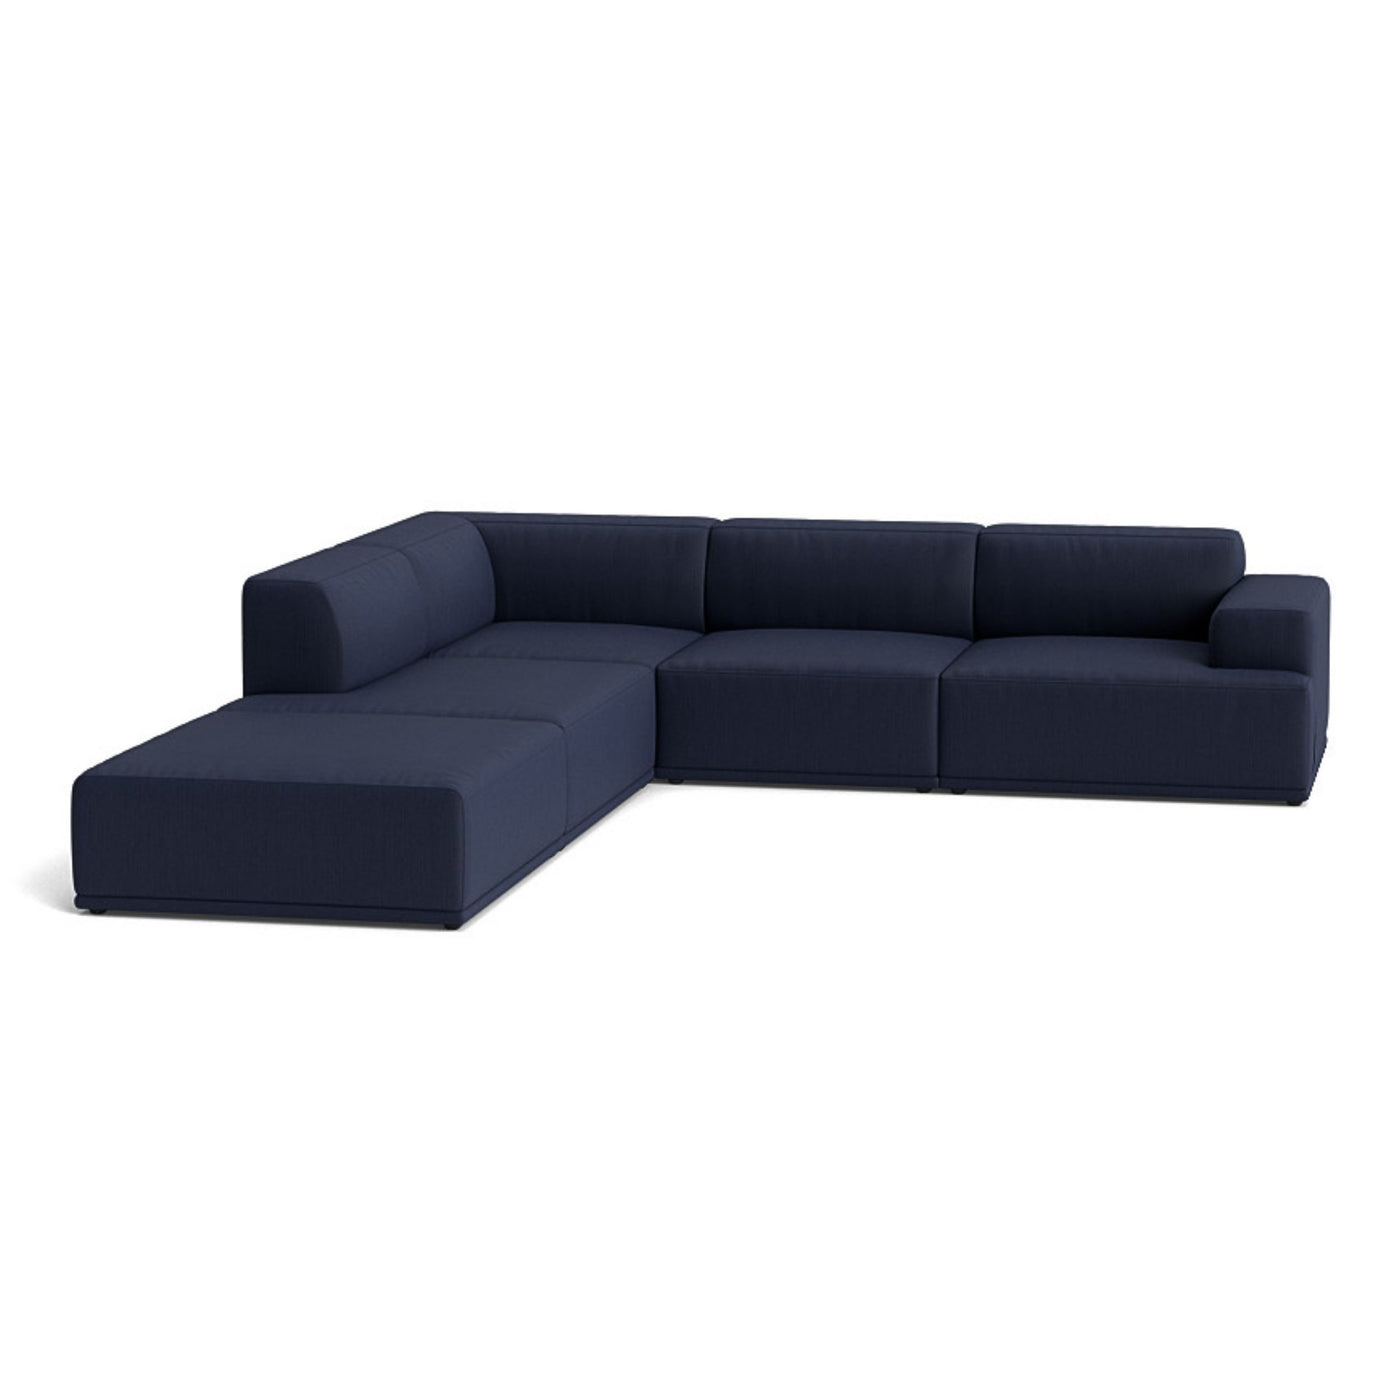 Muuto Connect Soft Modular Corner Sofa, configuration 1. Made-to-order from someday designs. #colour_balder-782